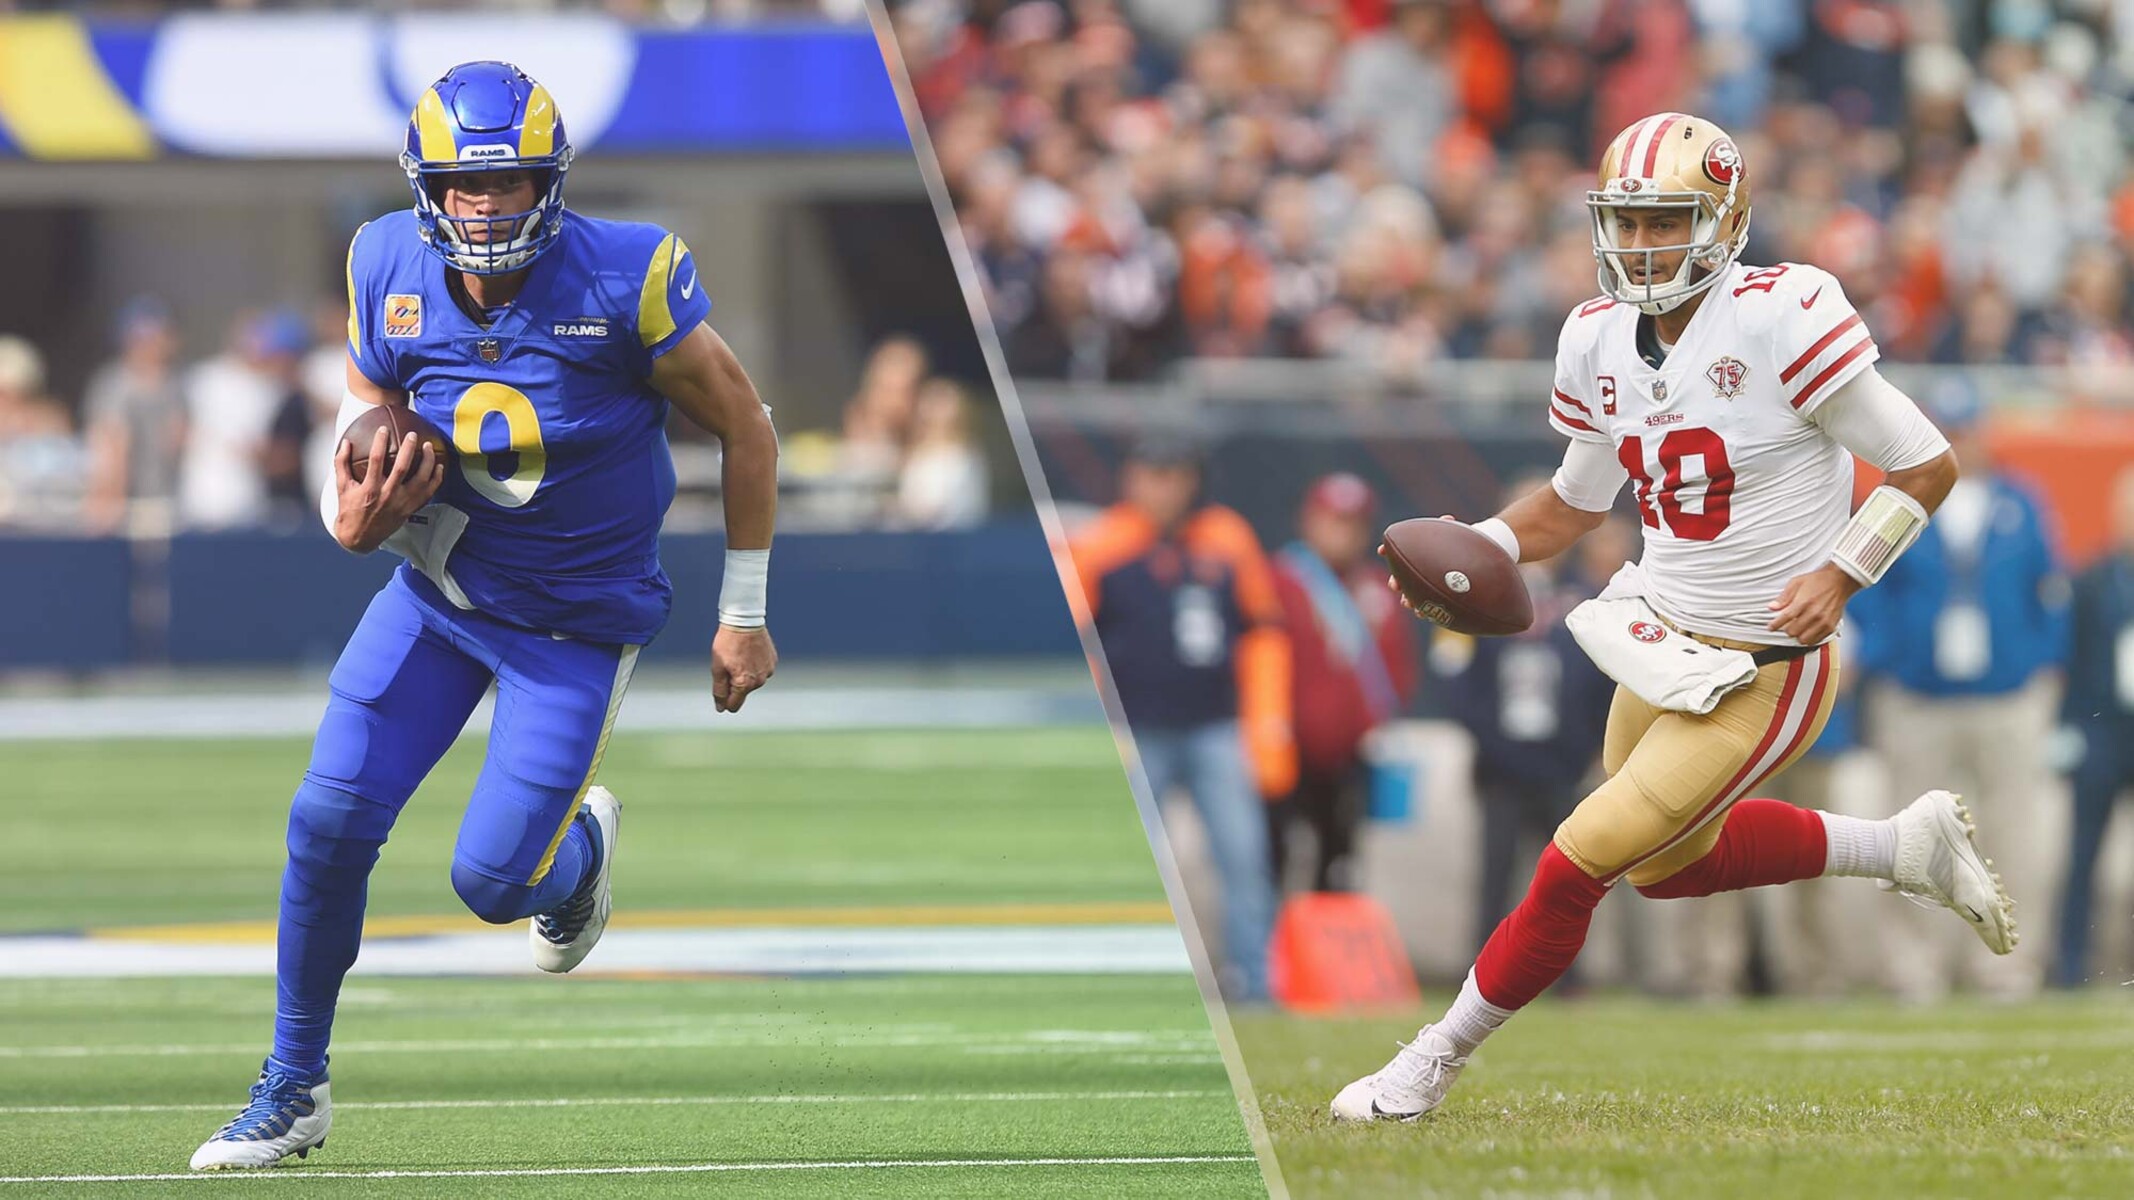 how to watch 49ers and rams game